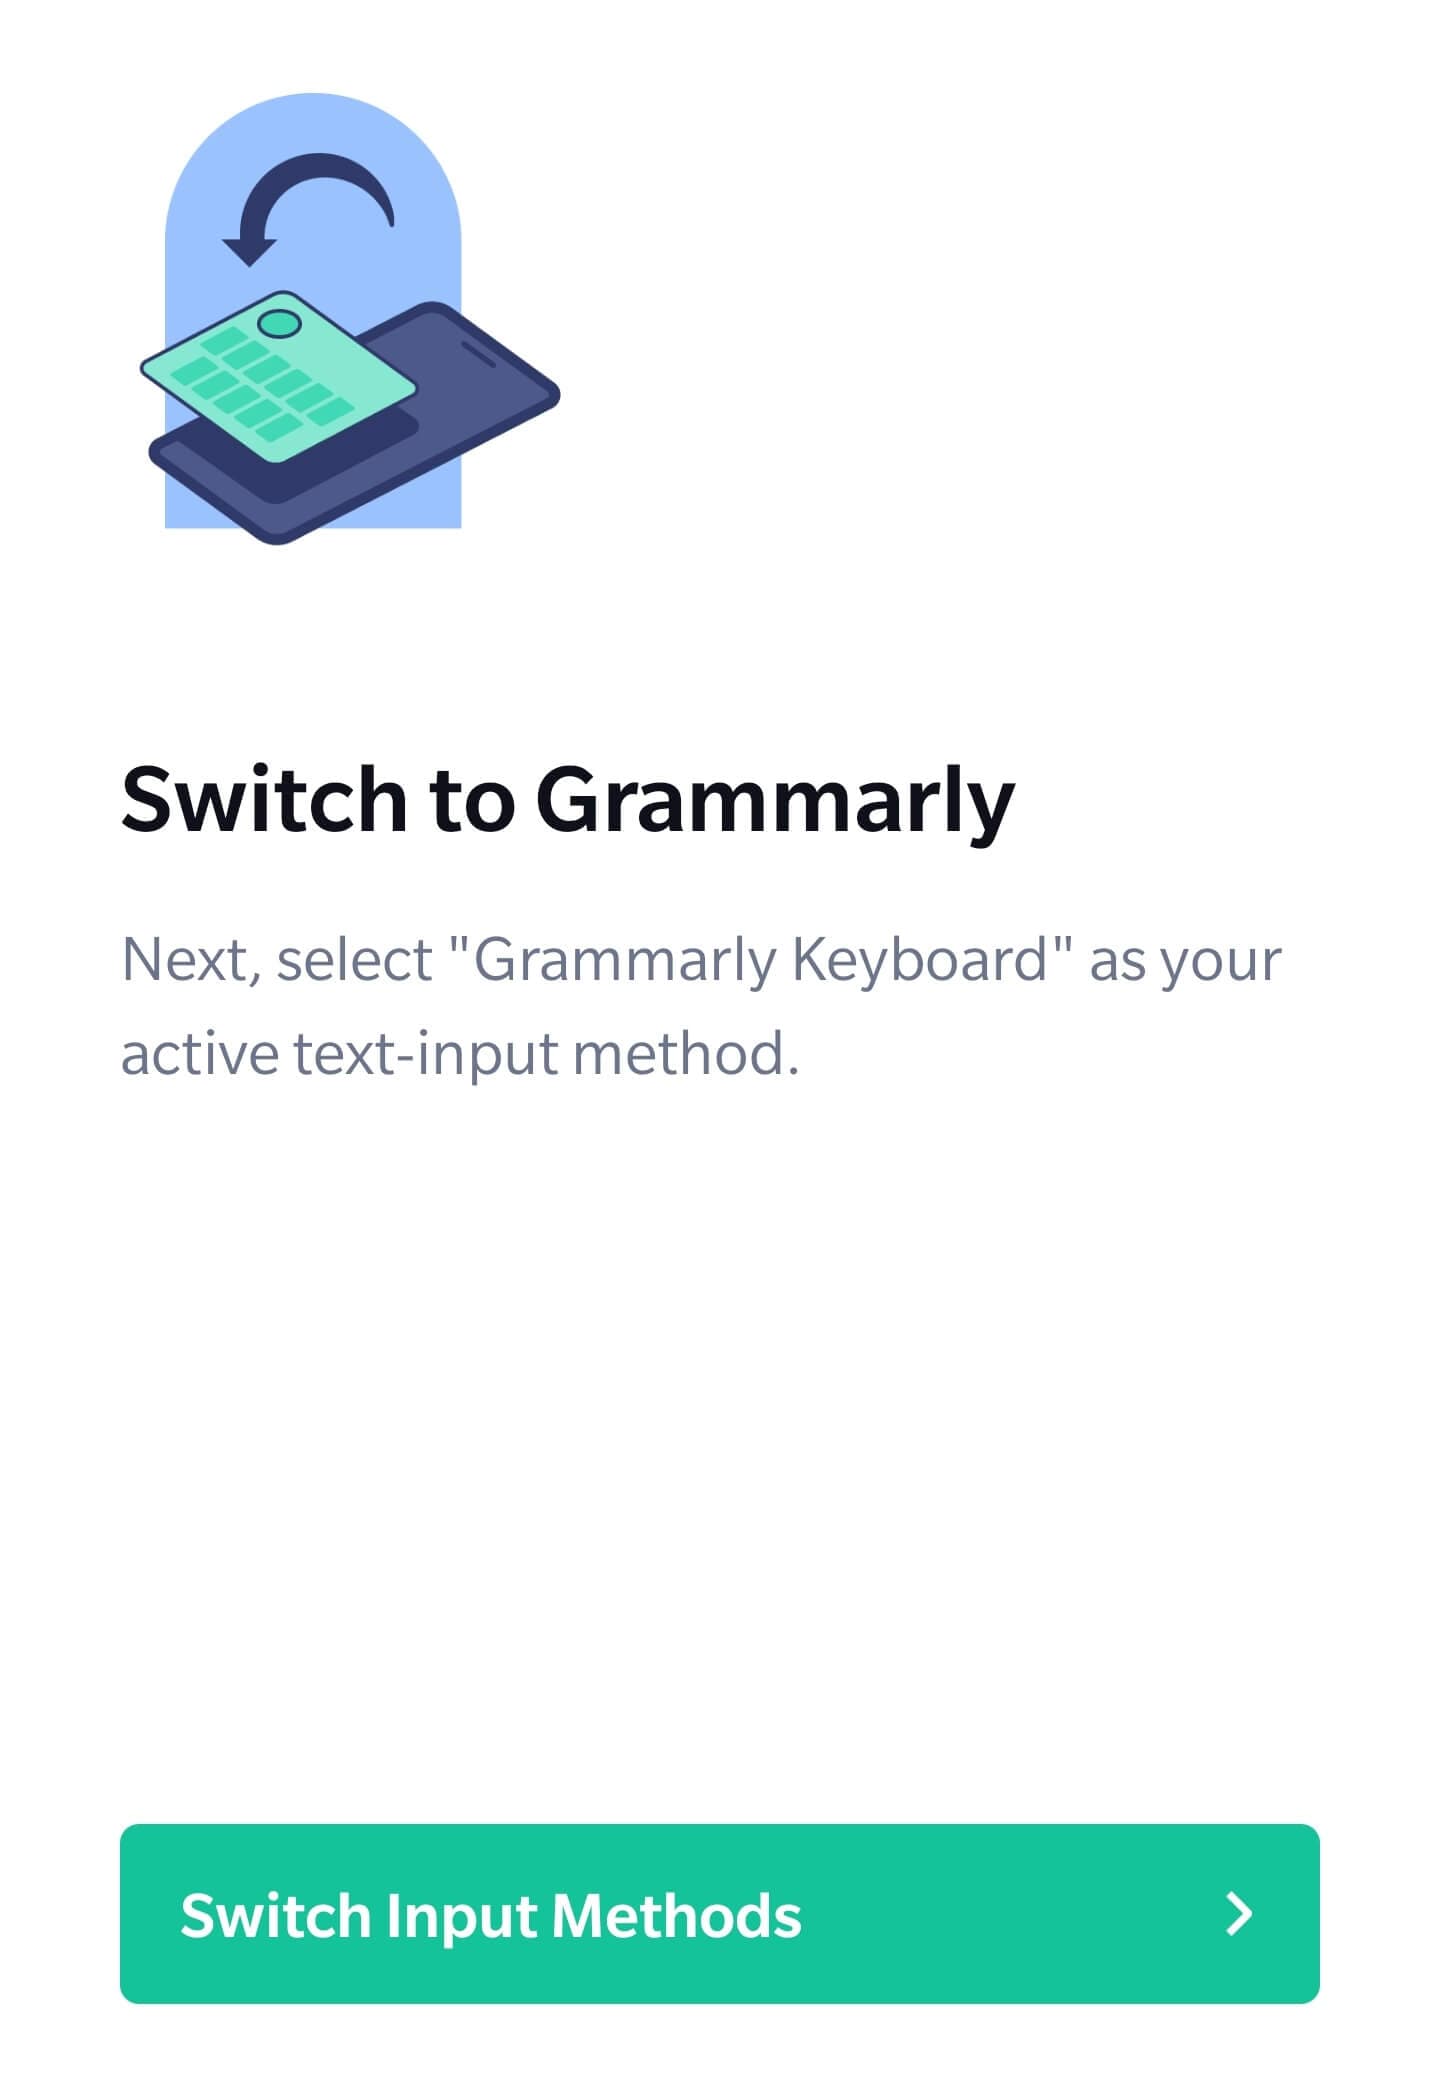 Grammarly keyboard app for phone